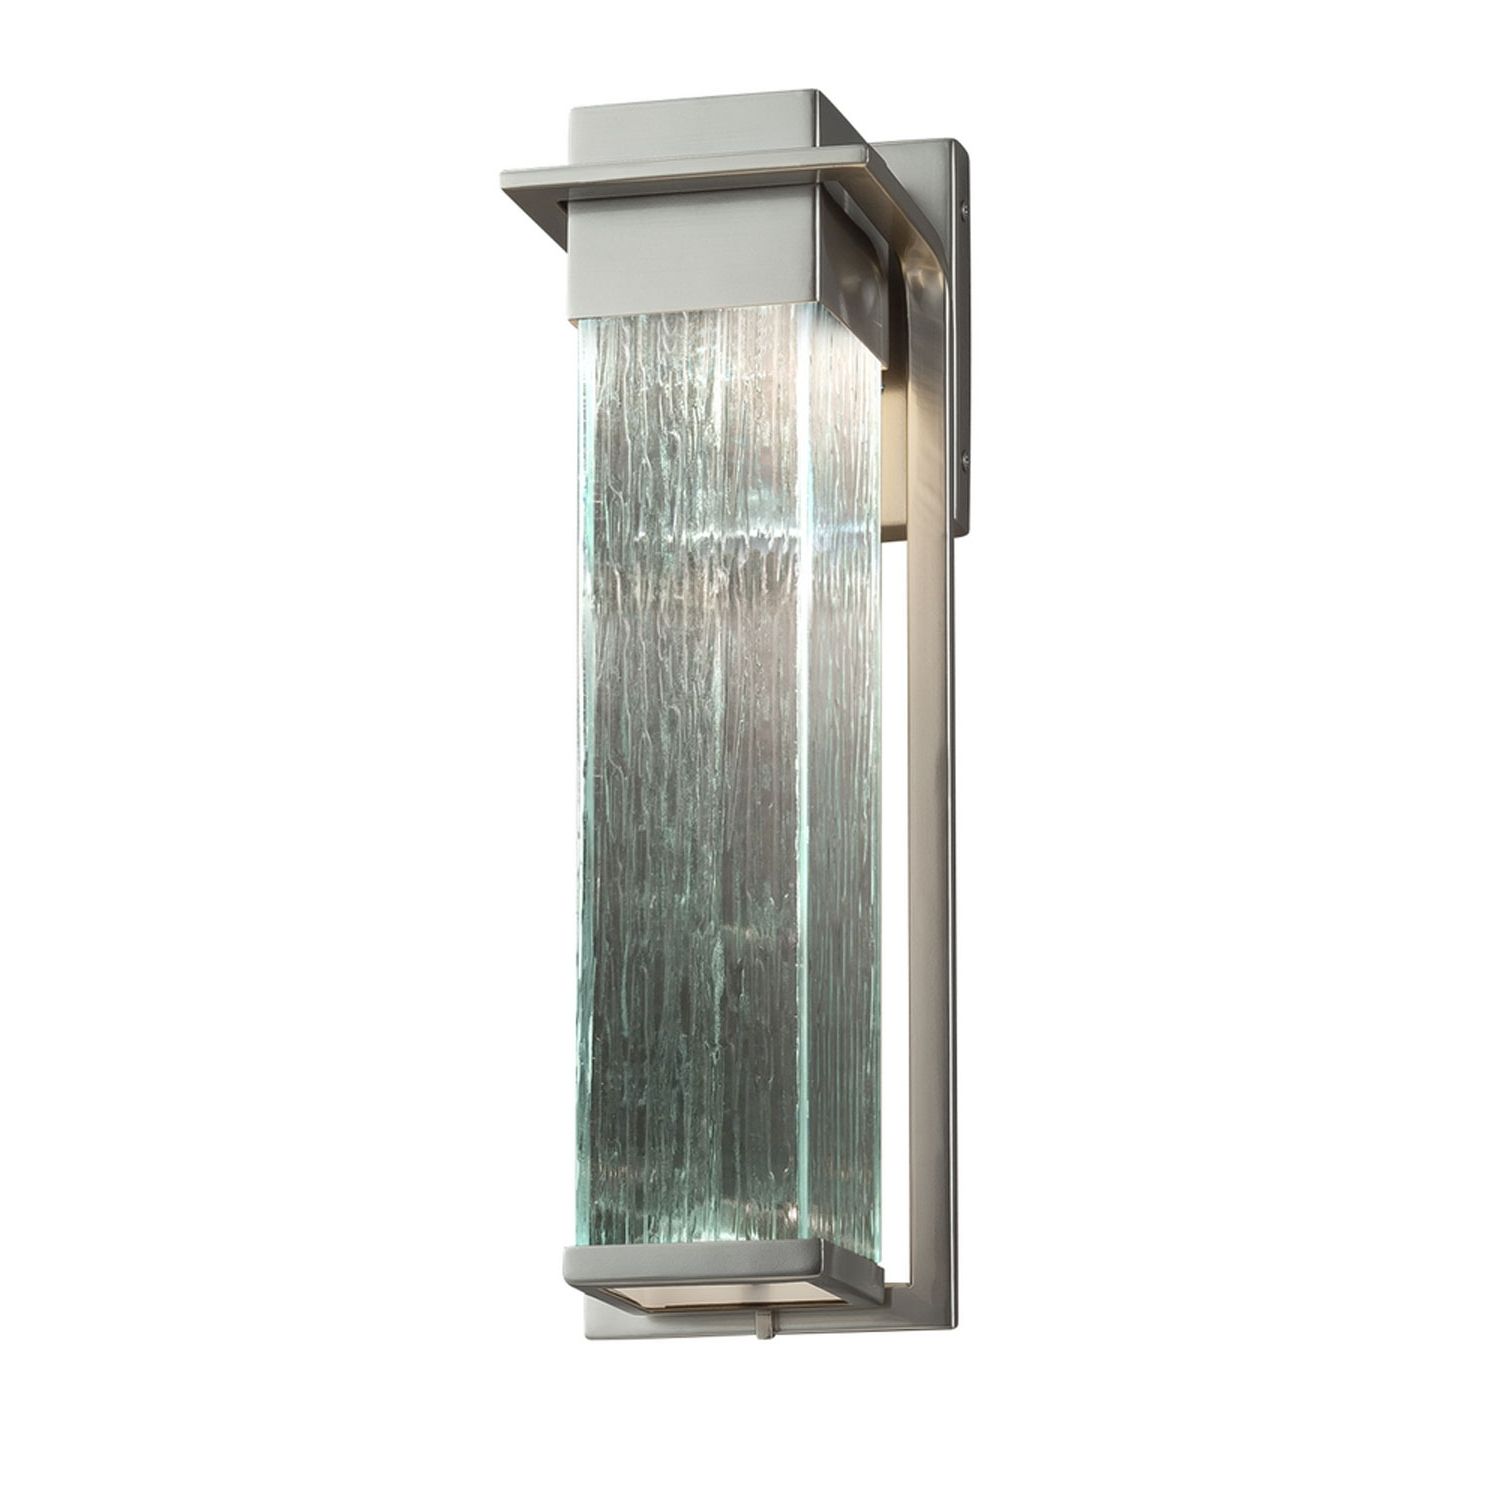 Brushed Nickel Outdoor Wall Lighting With Well Liked Fusion Pacific Brushed Nickel Led Outdoor Wall Sconce With Rain (View 20 of 20)